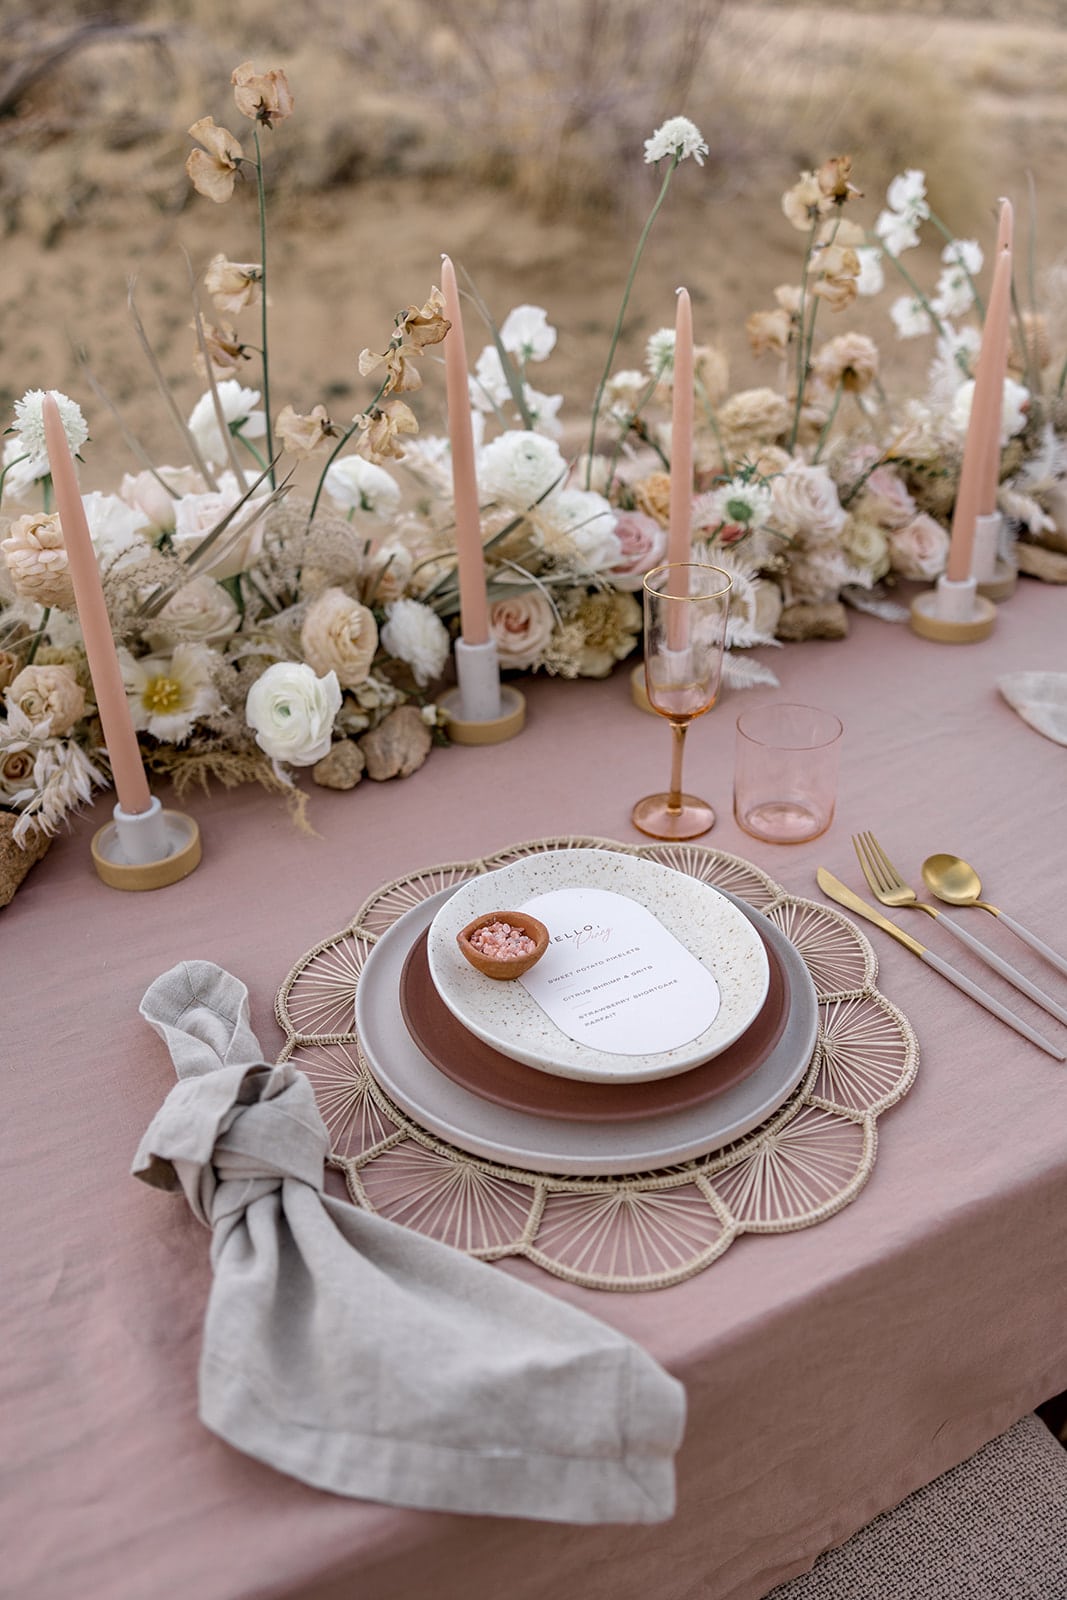 Dusty pink and cream reception table decor